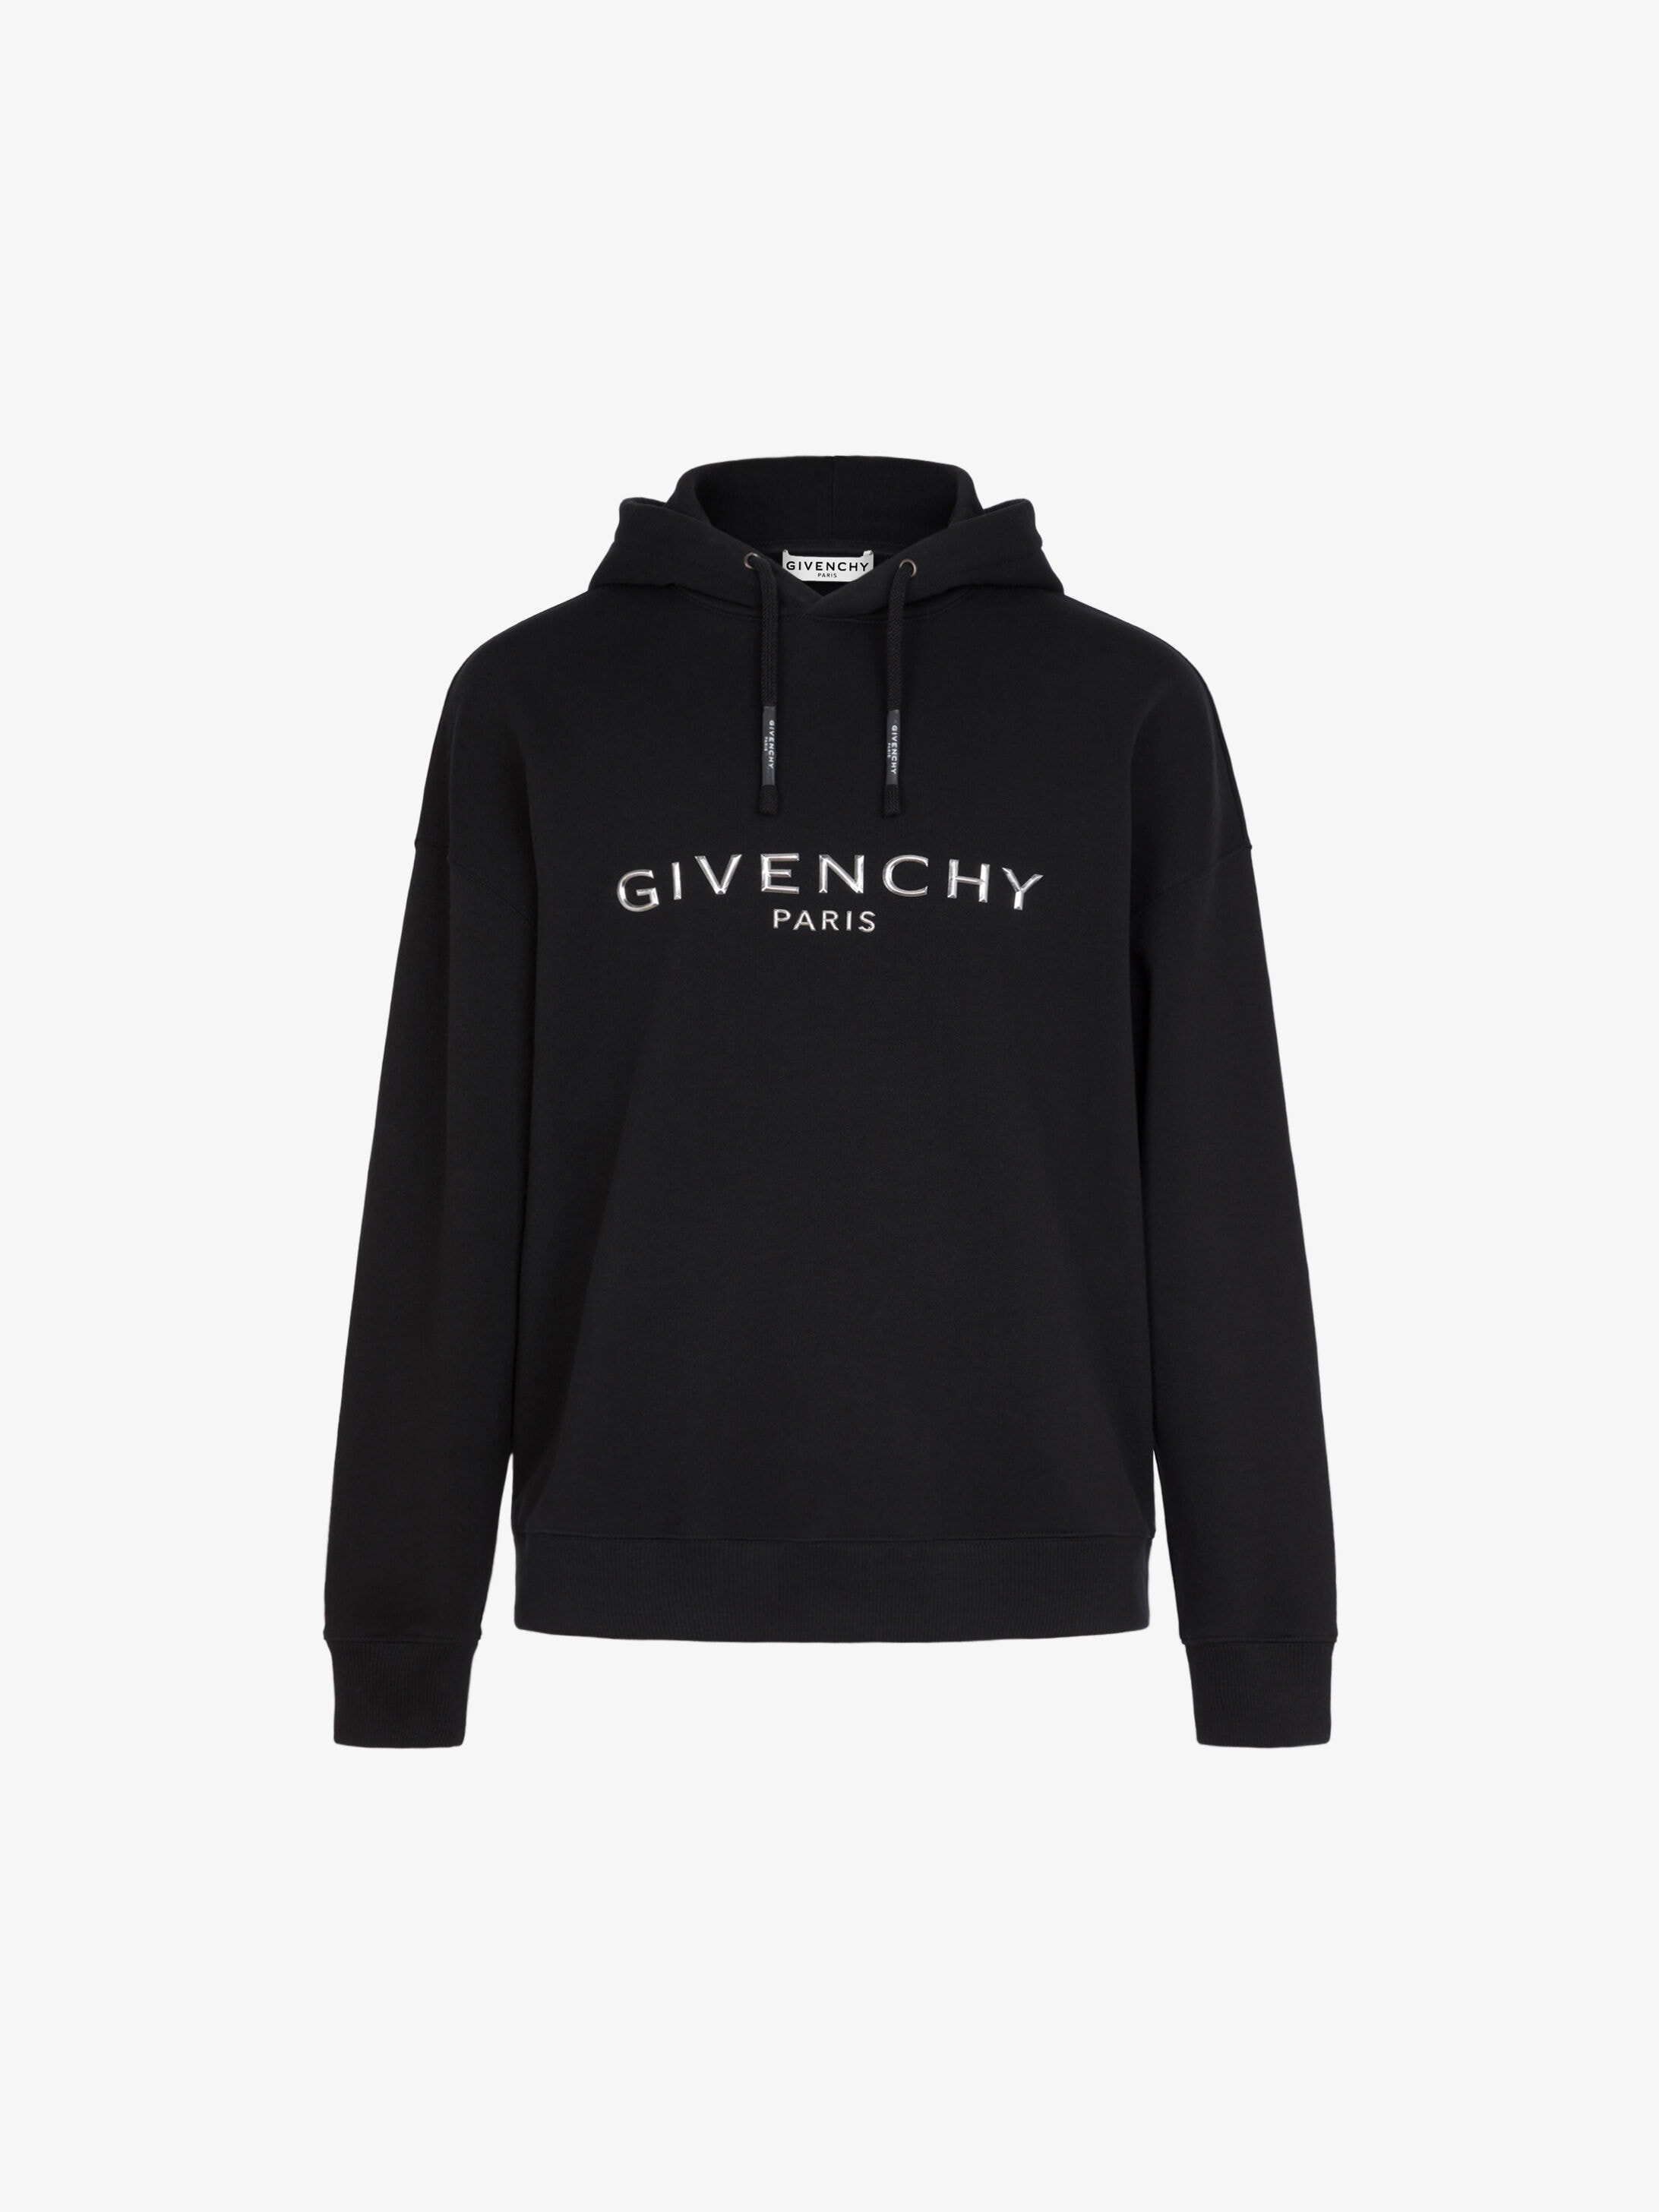 givenchy hoodie green